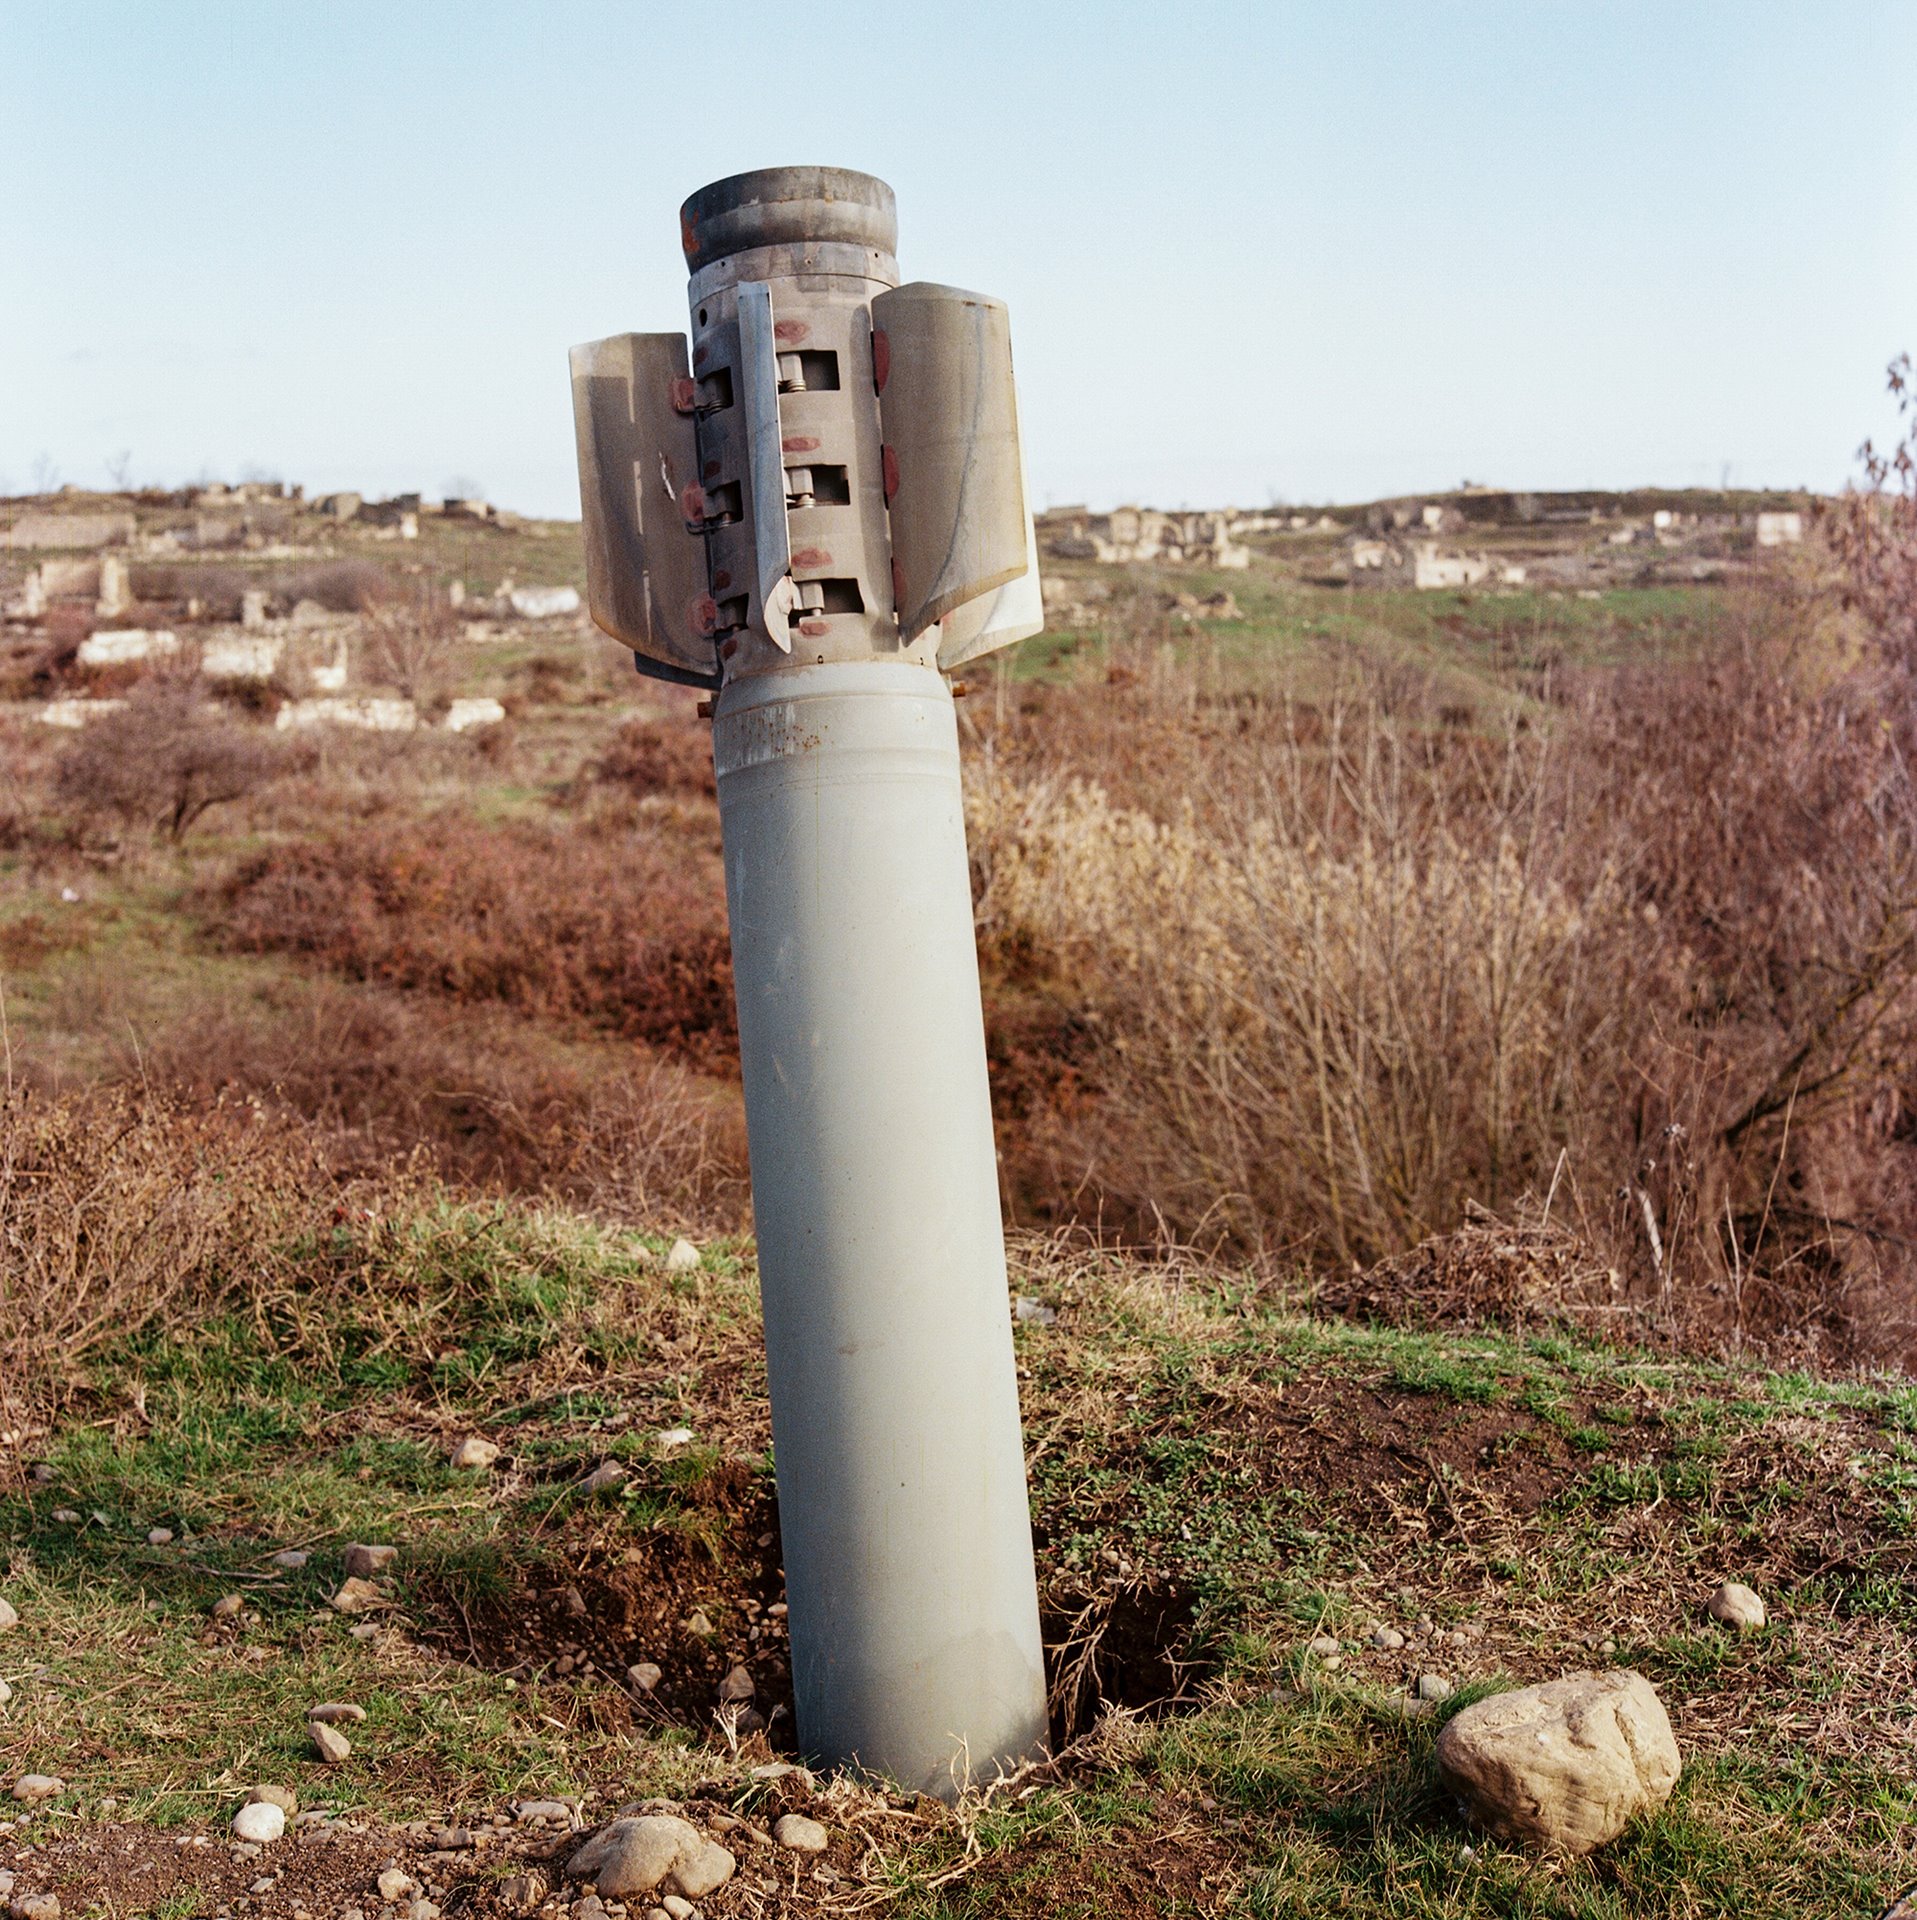 A Russian made &ldquo;Smerch&rdquo; rocket stuck in a field littered with anti-tank mines. Unlike Agdam and Kalbajar, which were returned to Azerbaijan without conflict, the district of Fizuli, Azerbaijan was fiercely contested in the Second Nagorno-Karabakh War in 2020.